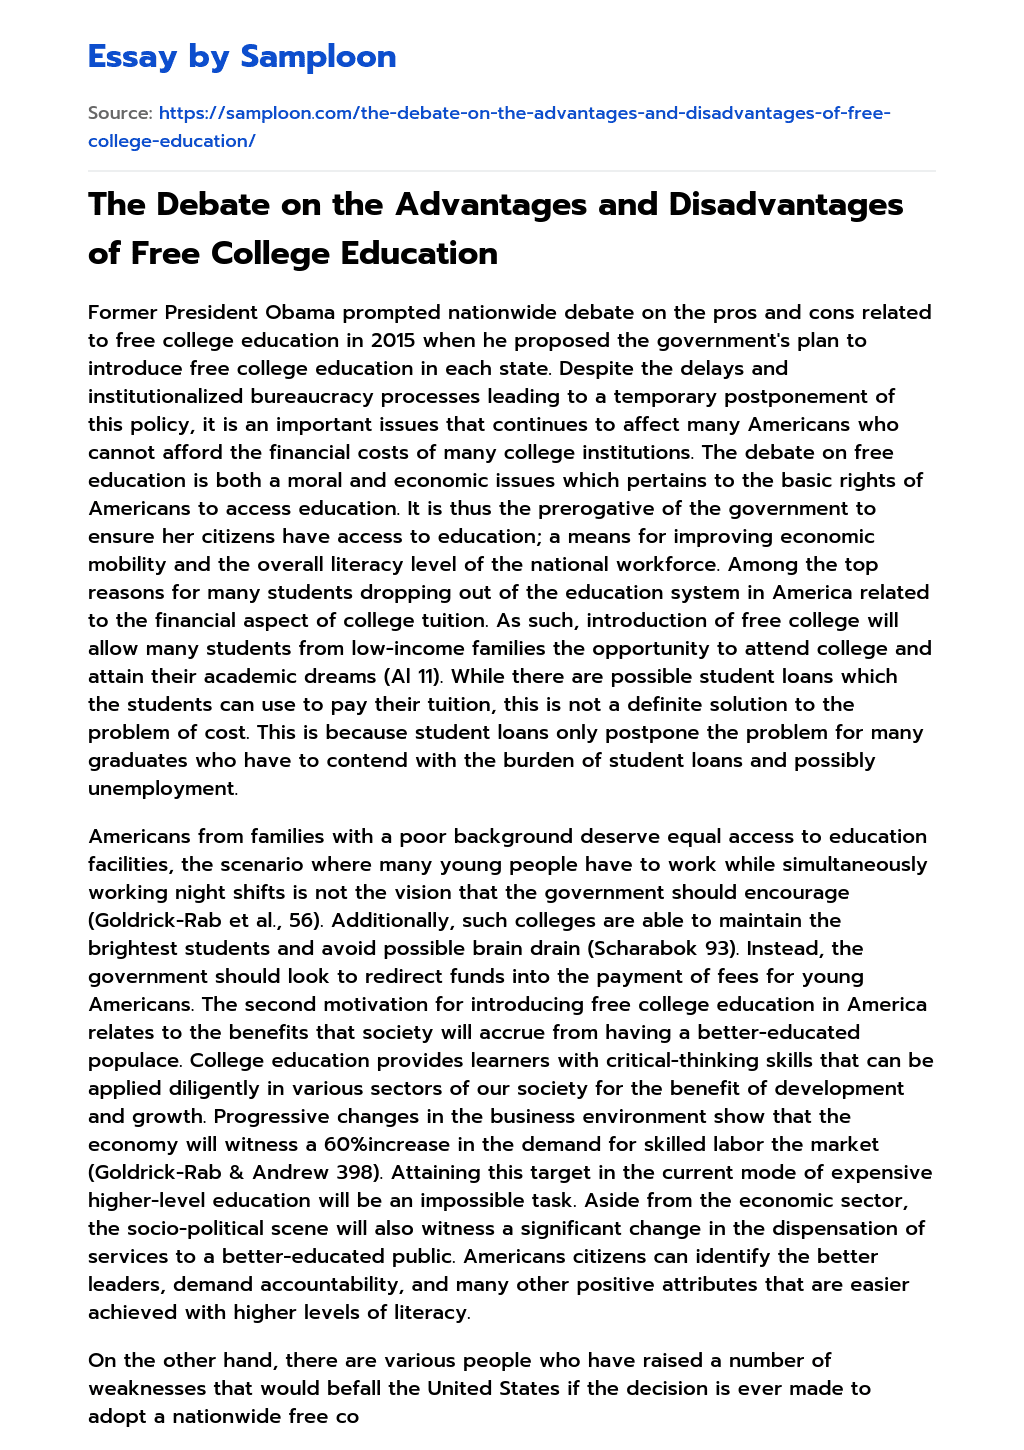 The Debate on the Advantages and Disadvantages of Free College Education essay